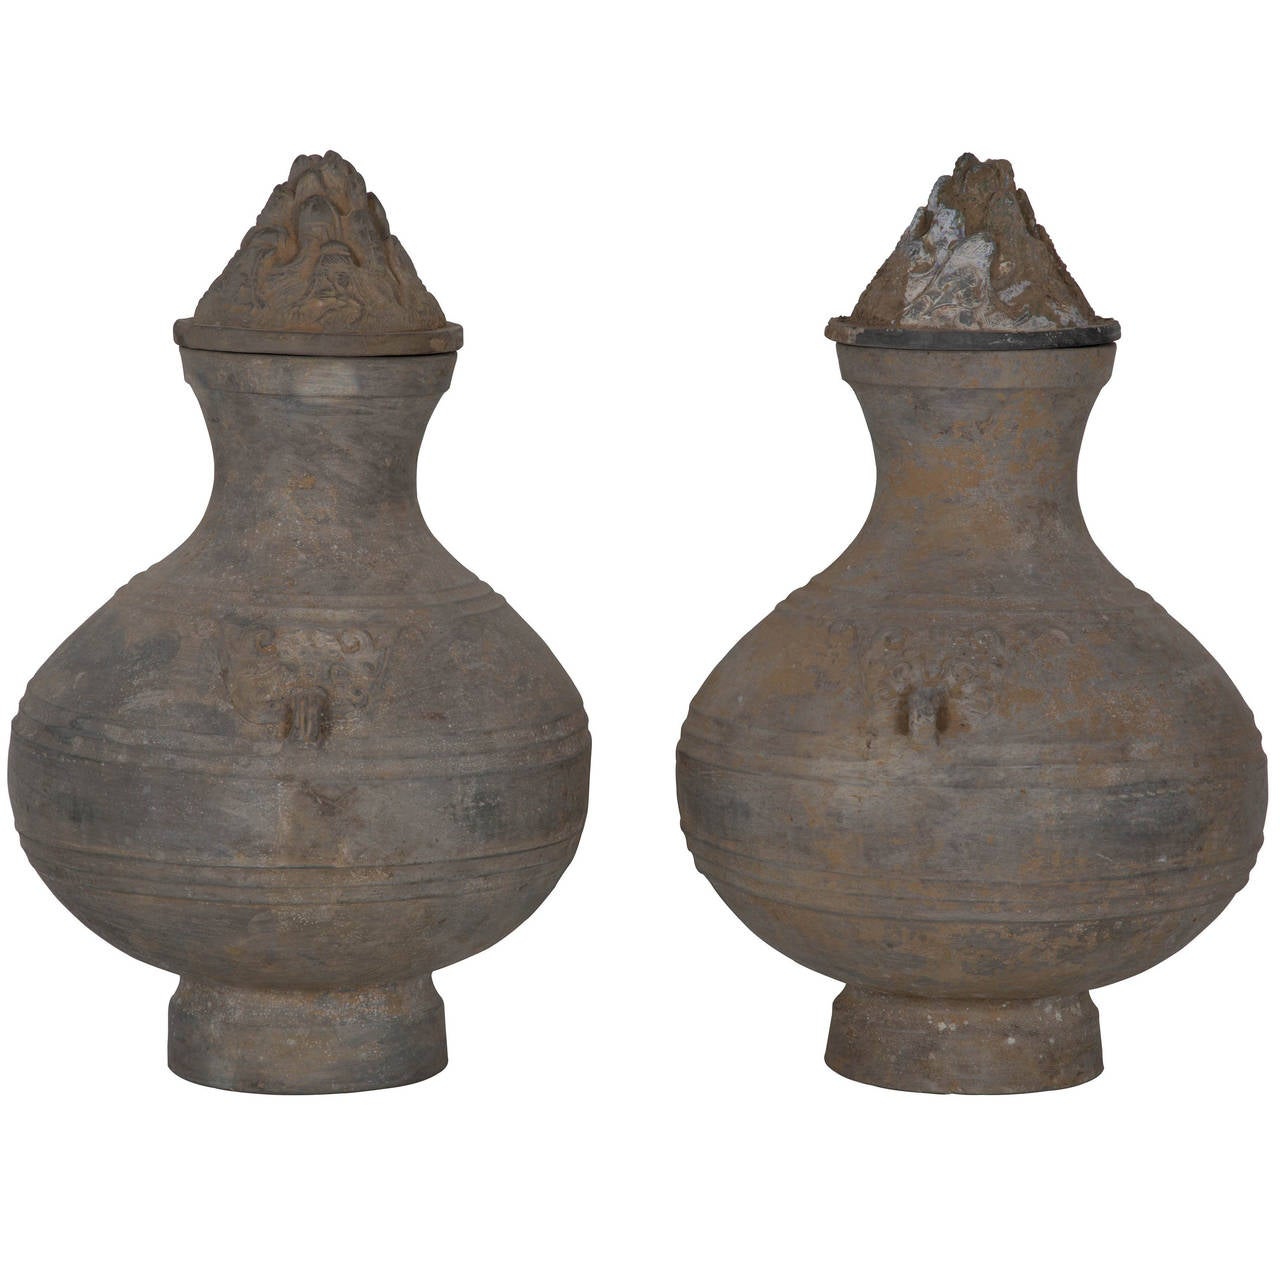 An exquisite and rare pair of 2000 year old Han Dynasty urns with separate decoratively detailed conical lids. £1,160 each.